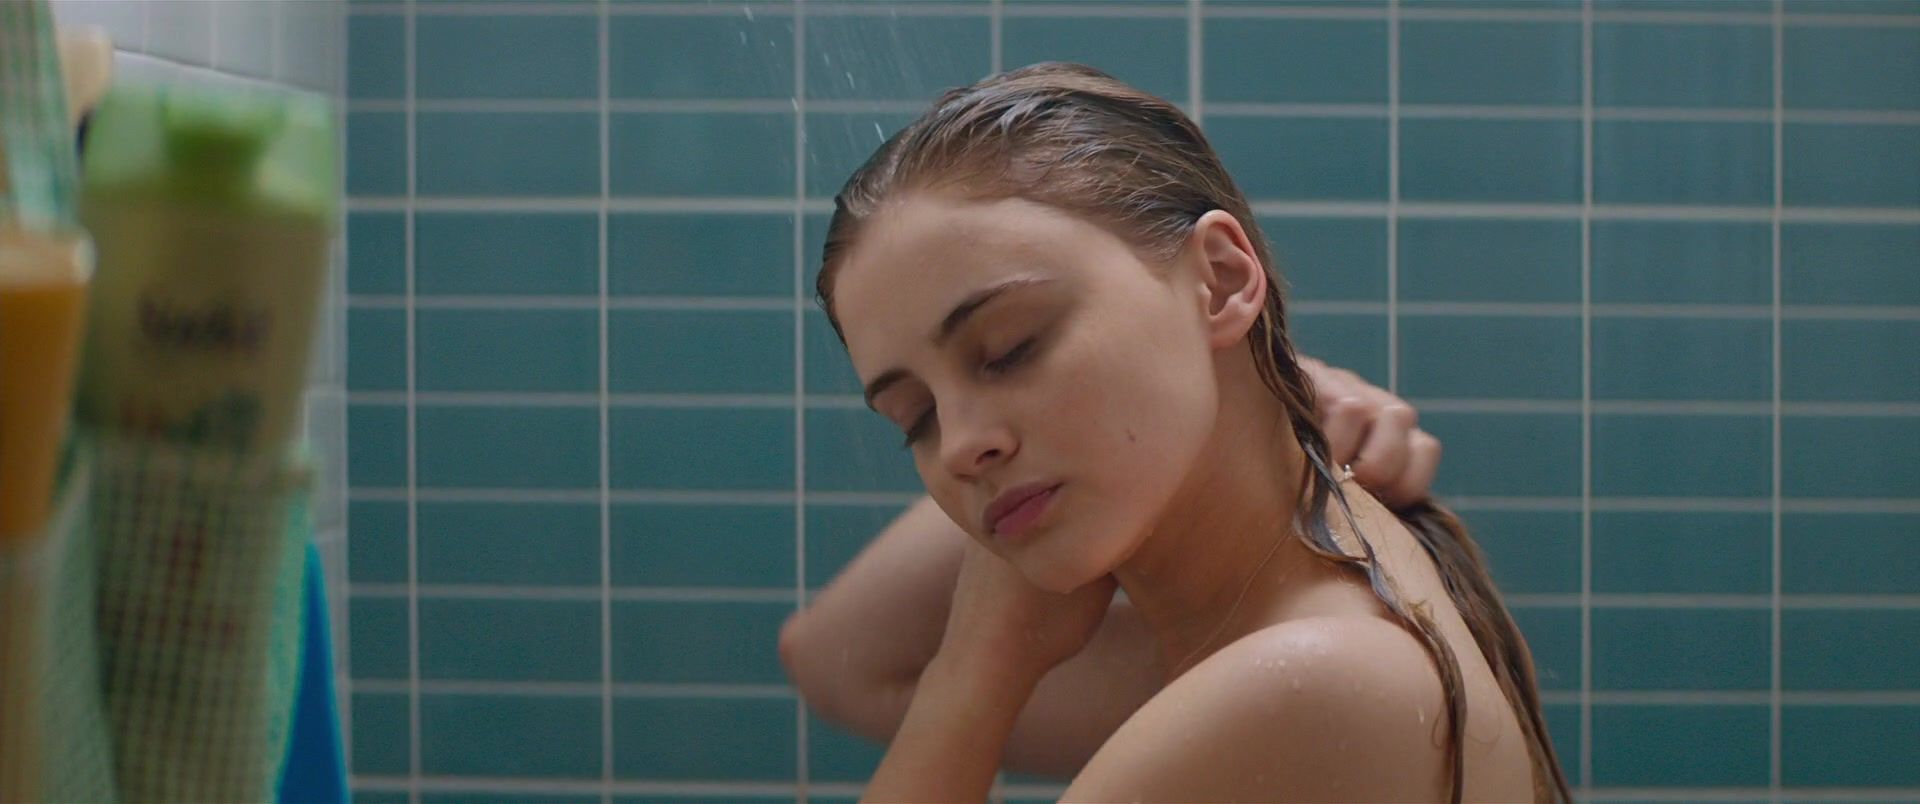 Officesex Josephine Langford nude - After (2019) xPee